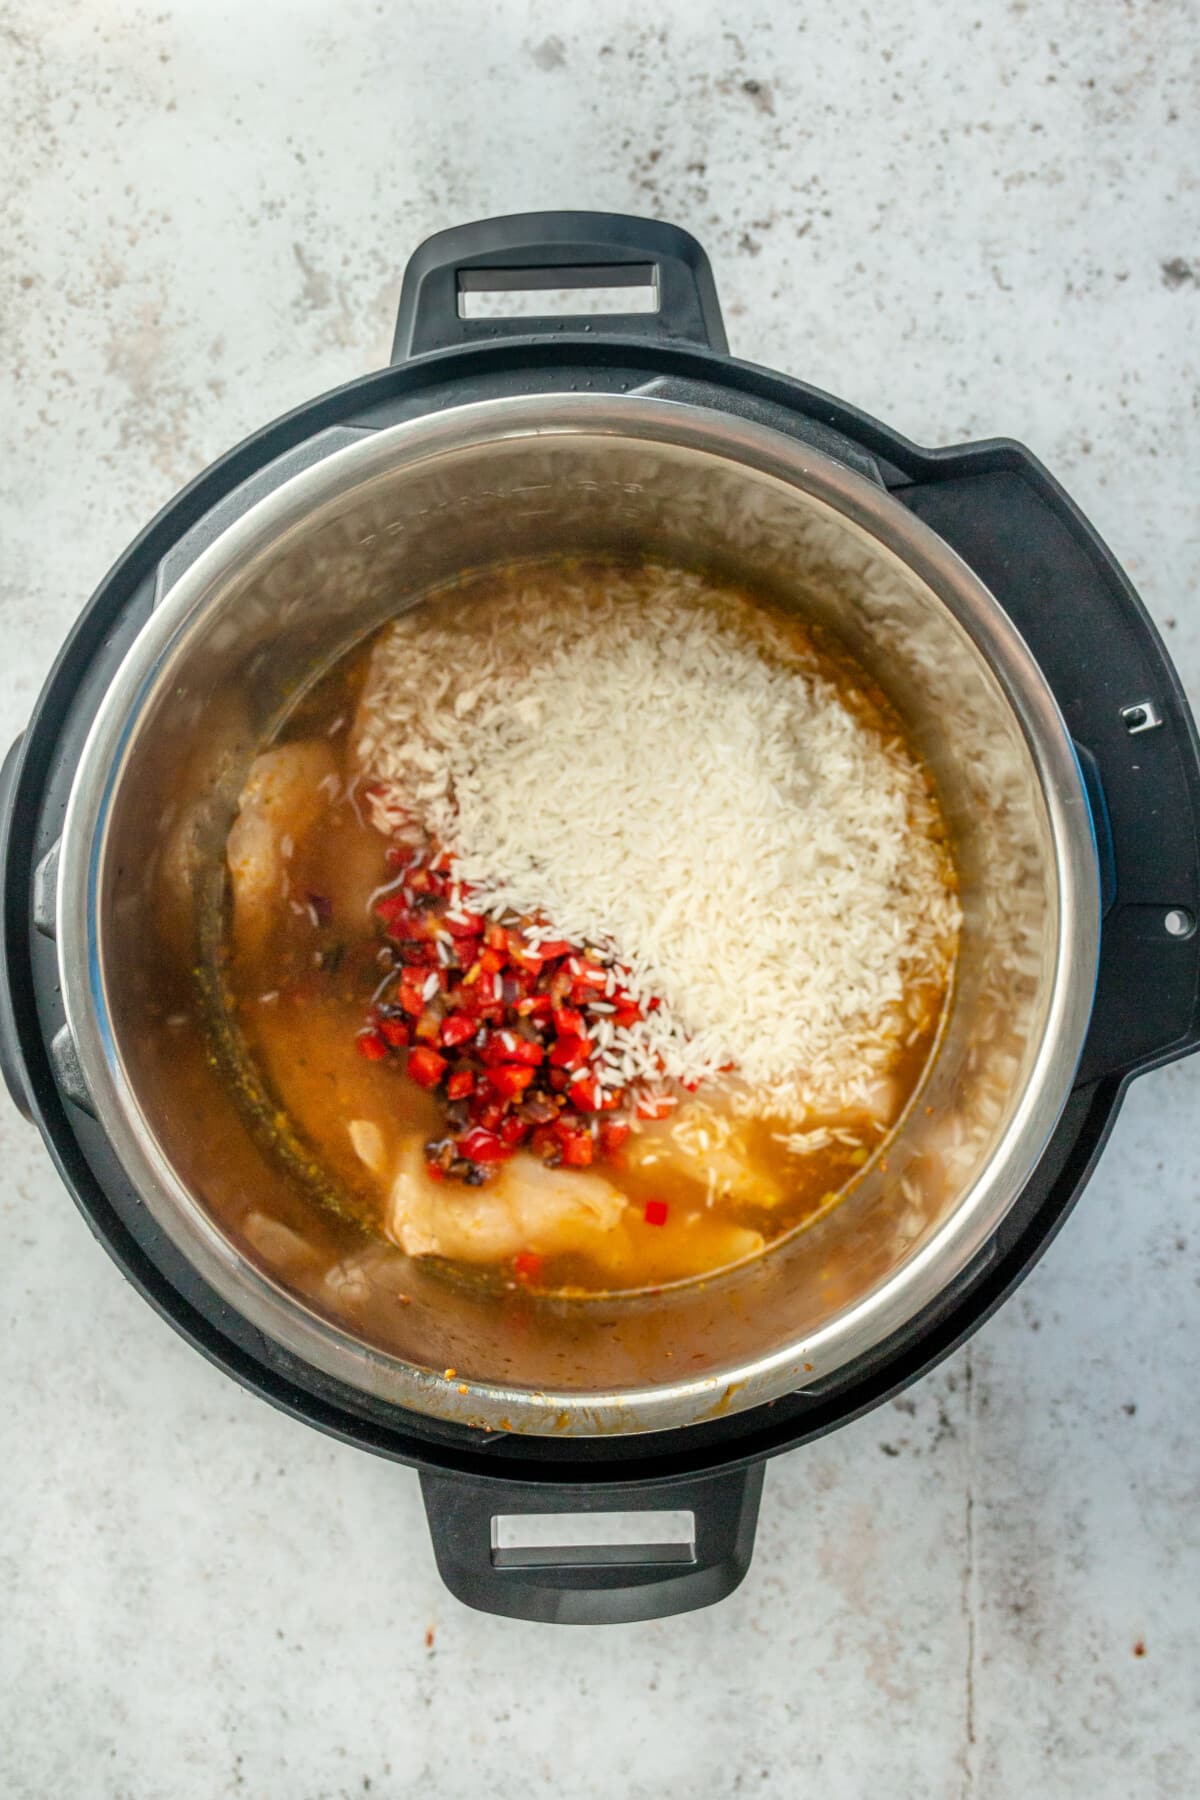 A variety of ingredients have been placed into the instant pot with the chicken.